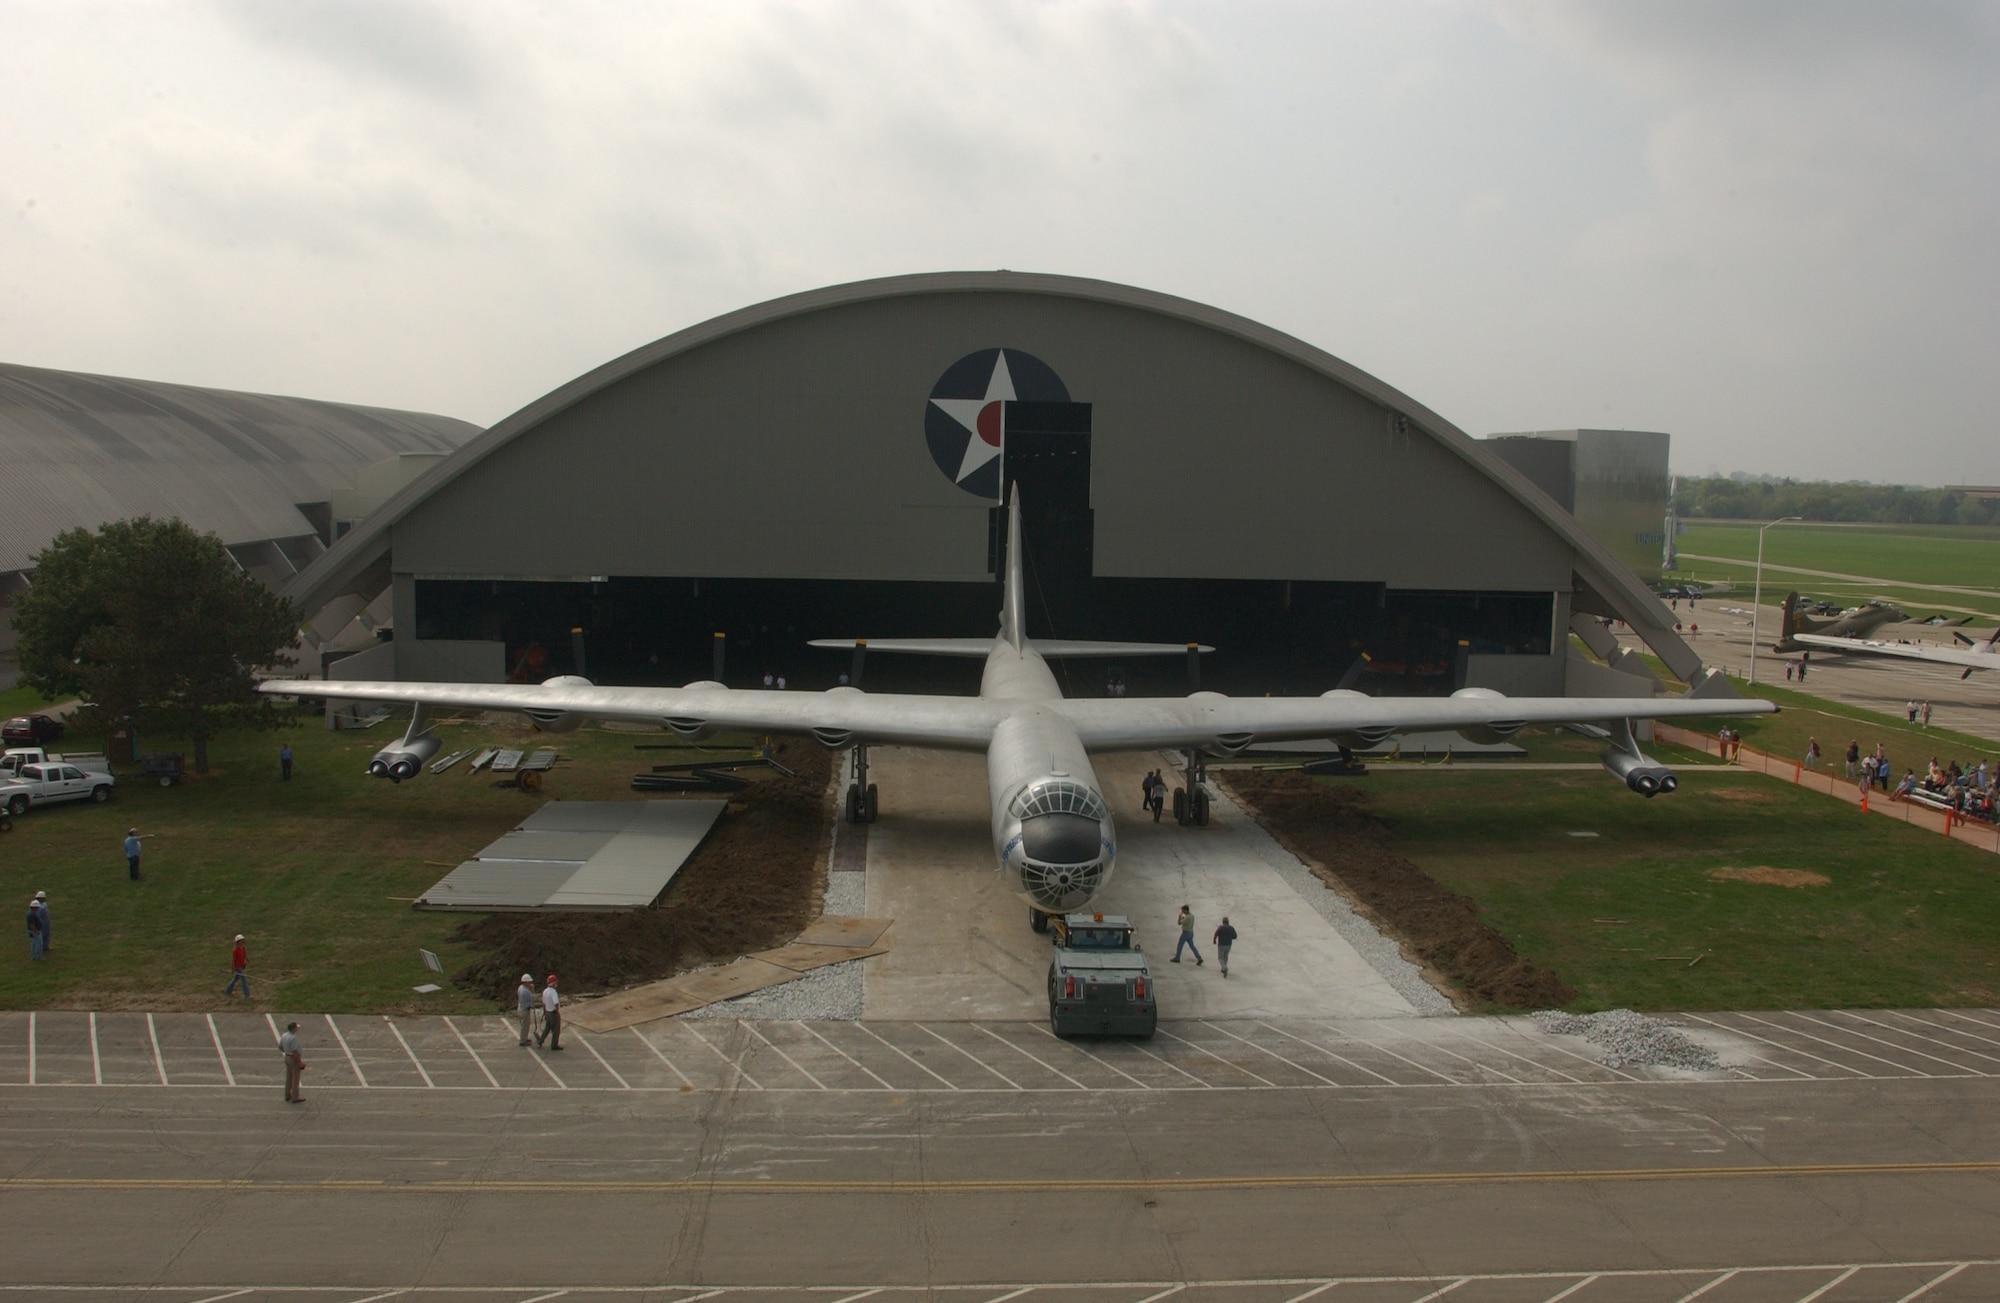 The Convair B-36J Peacemaker aircraft move from building one to building three in October, 2002 at the National Museum of the U.S. Air Force. (U.S. Air Force photo)